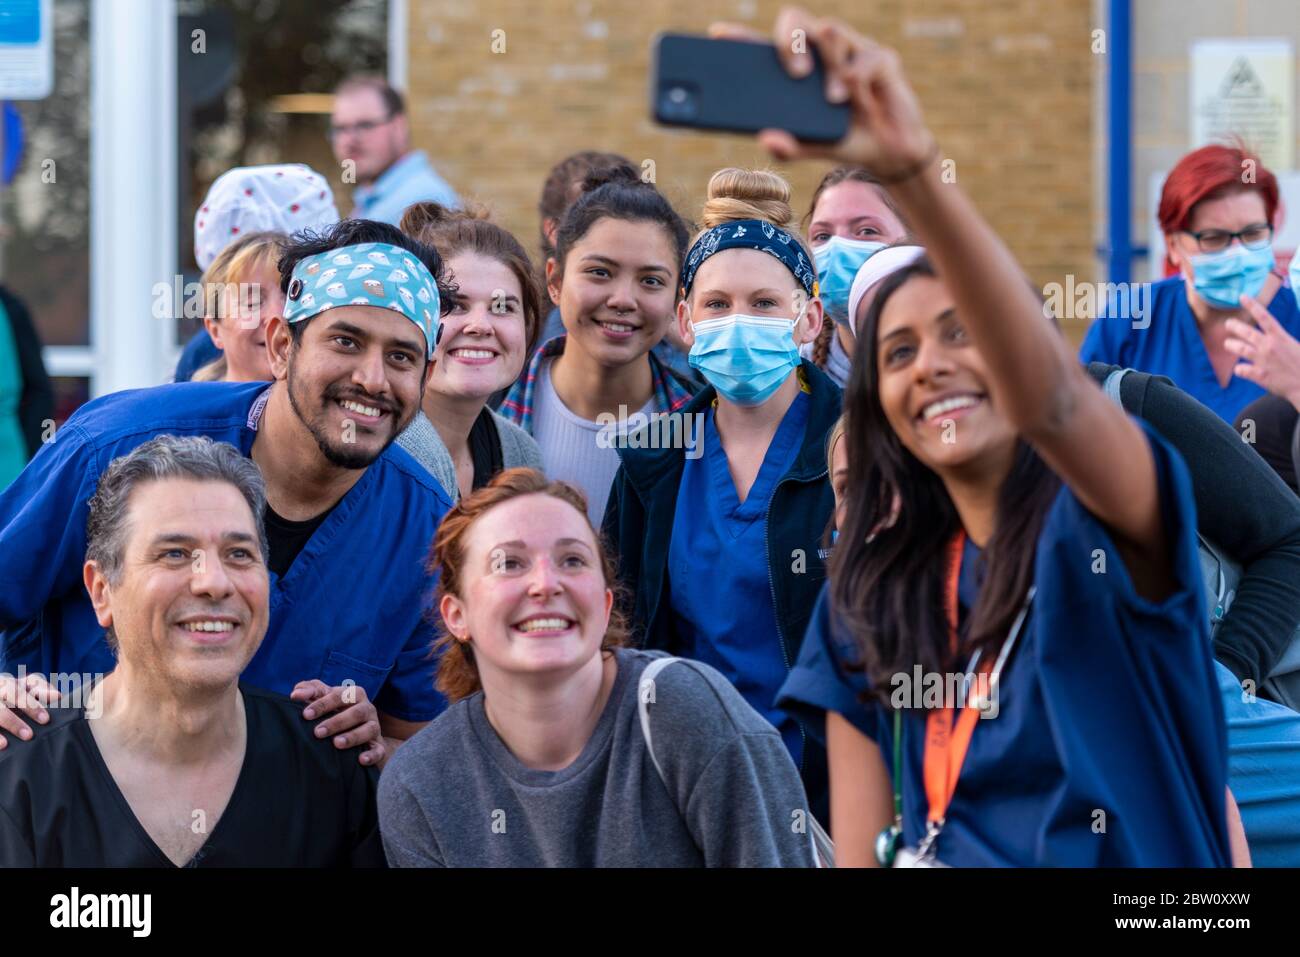 Staff at final clap for carers at 8pm Thursday outside Southend University Hospital, Essex, UK. Ward team gathering for a selfie. Doctors and nurses Stock Photo